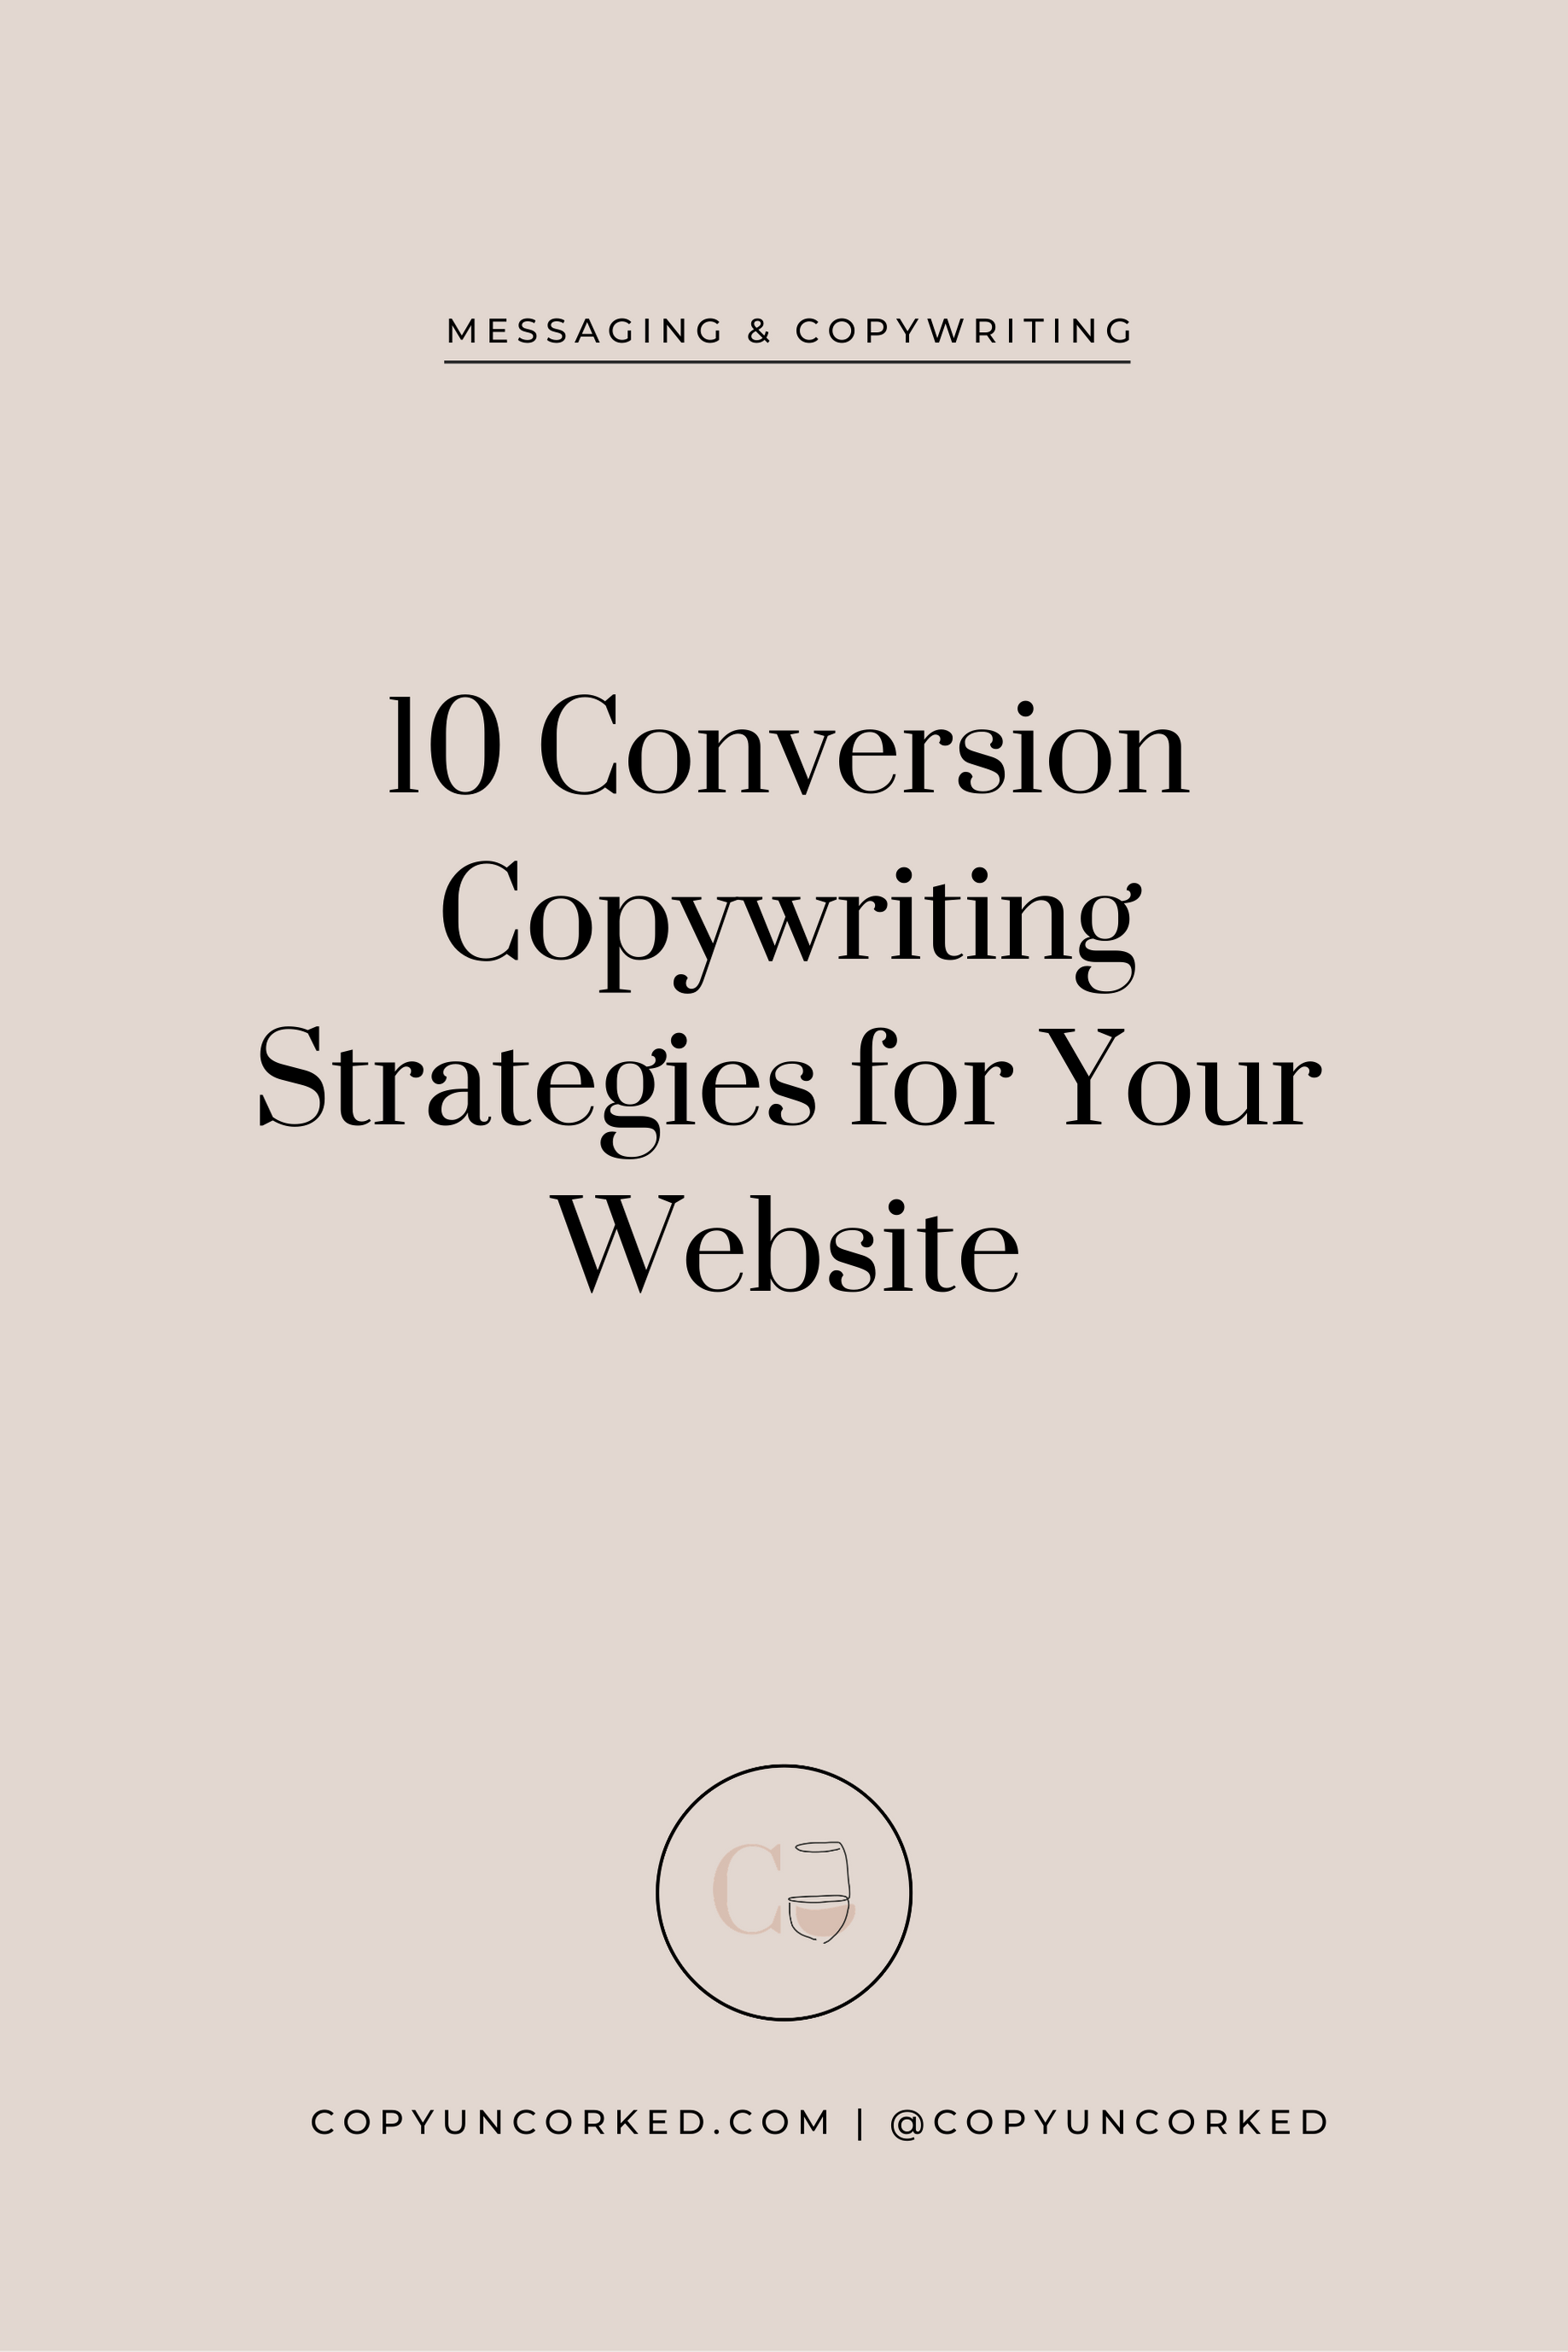 10 Quick Conversion Copywriting Fixes for Your Website - copyuncorked.com